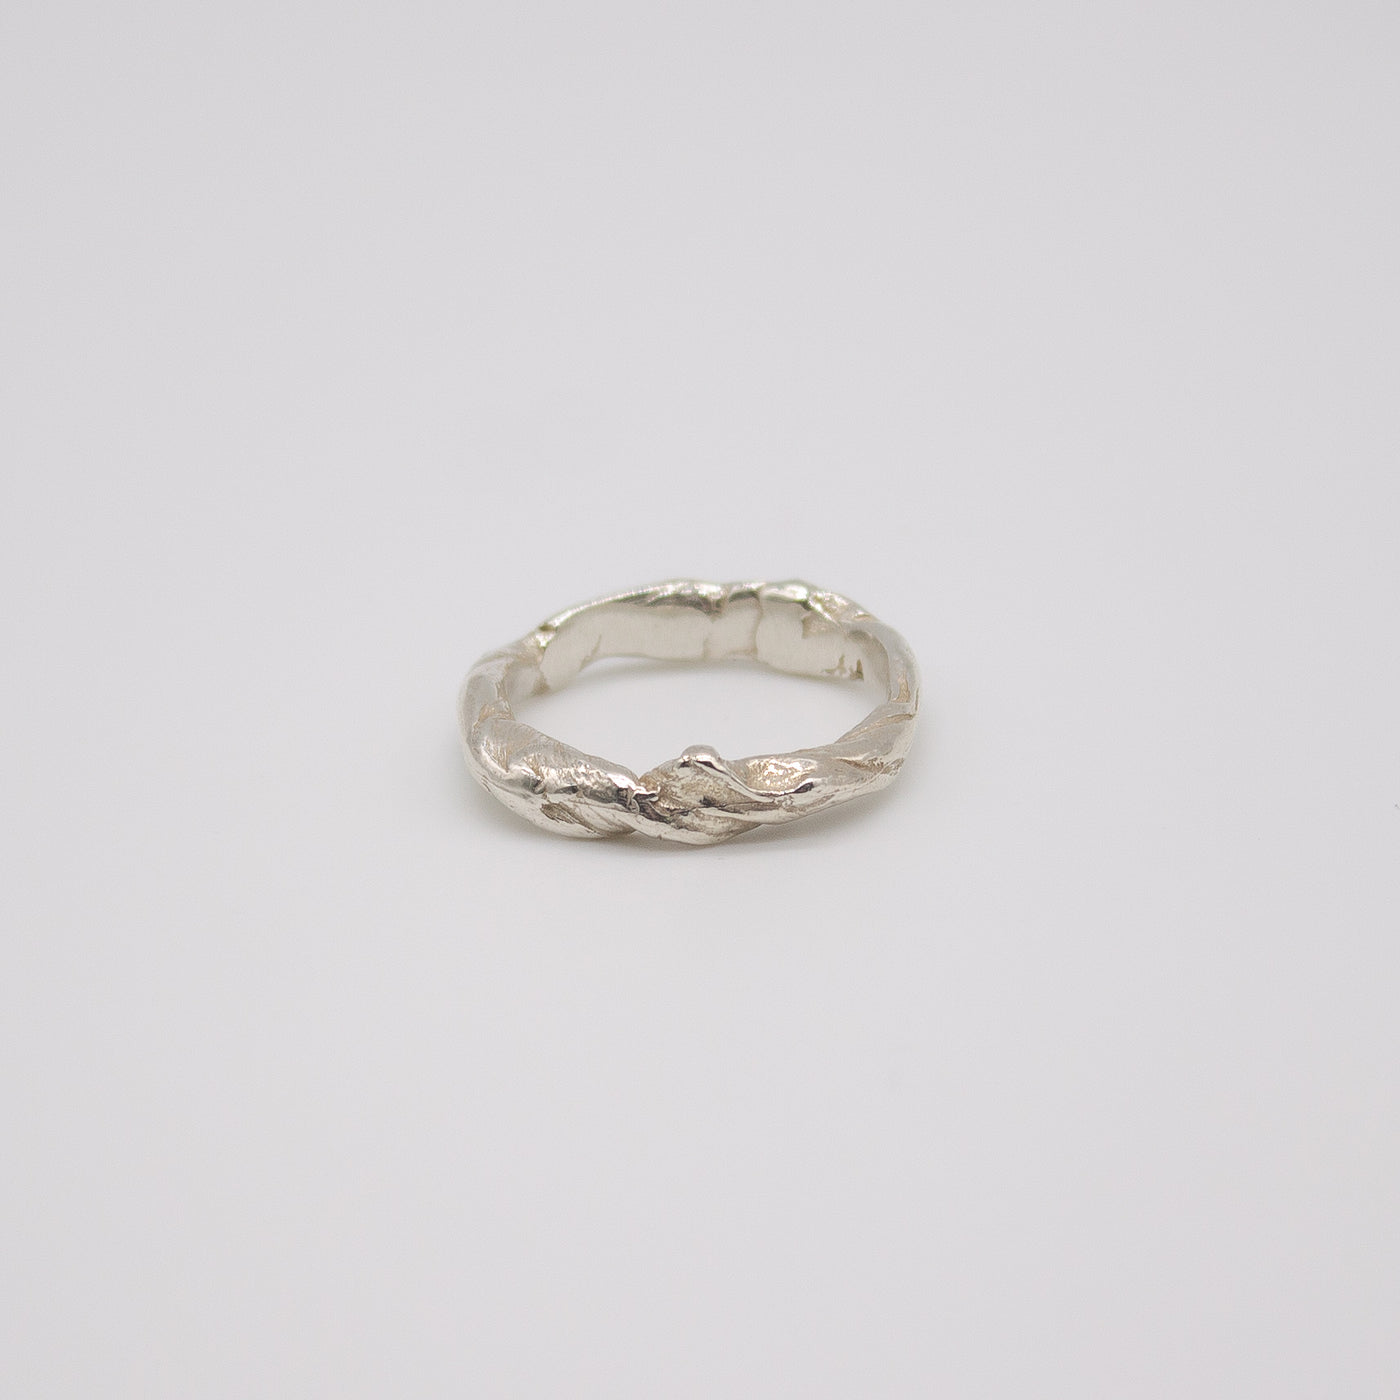 FEVIK // Ring made of fine silver